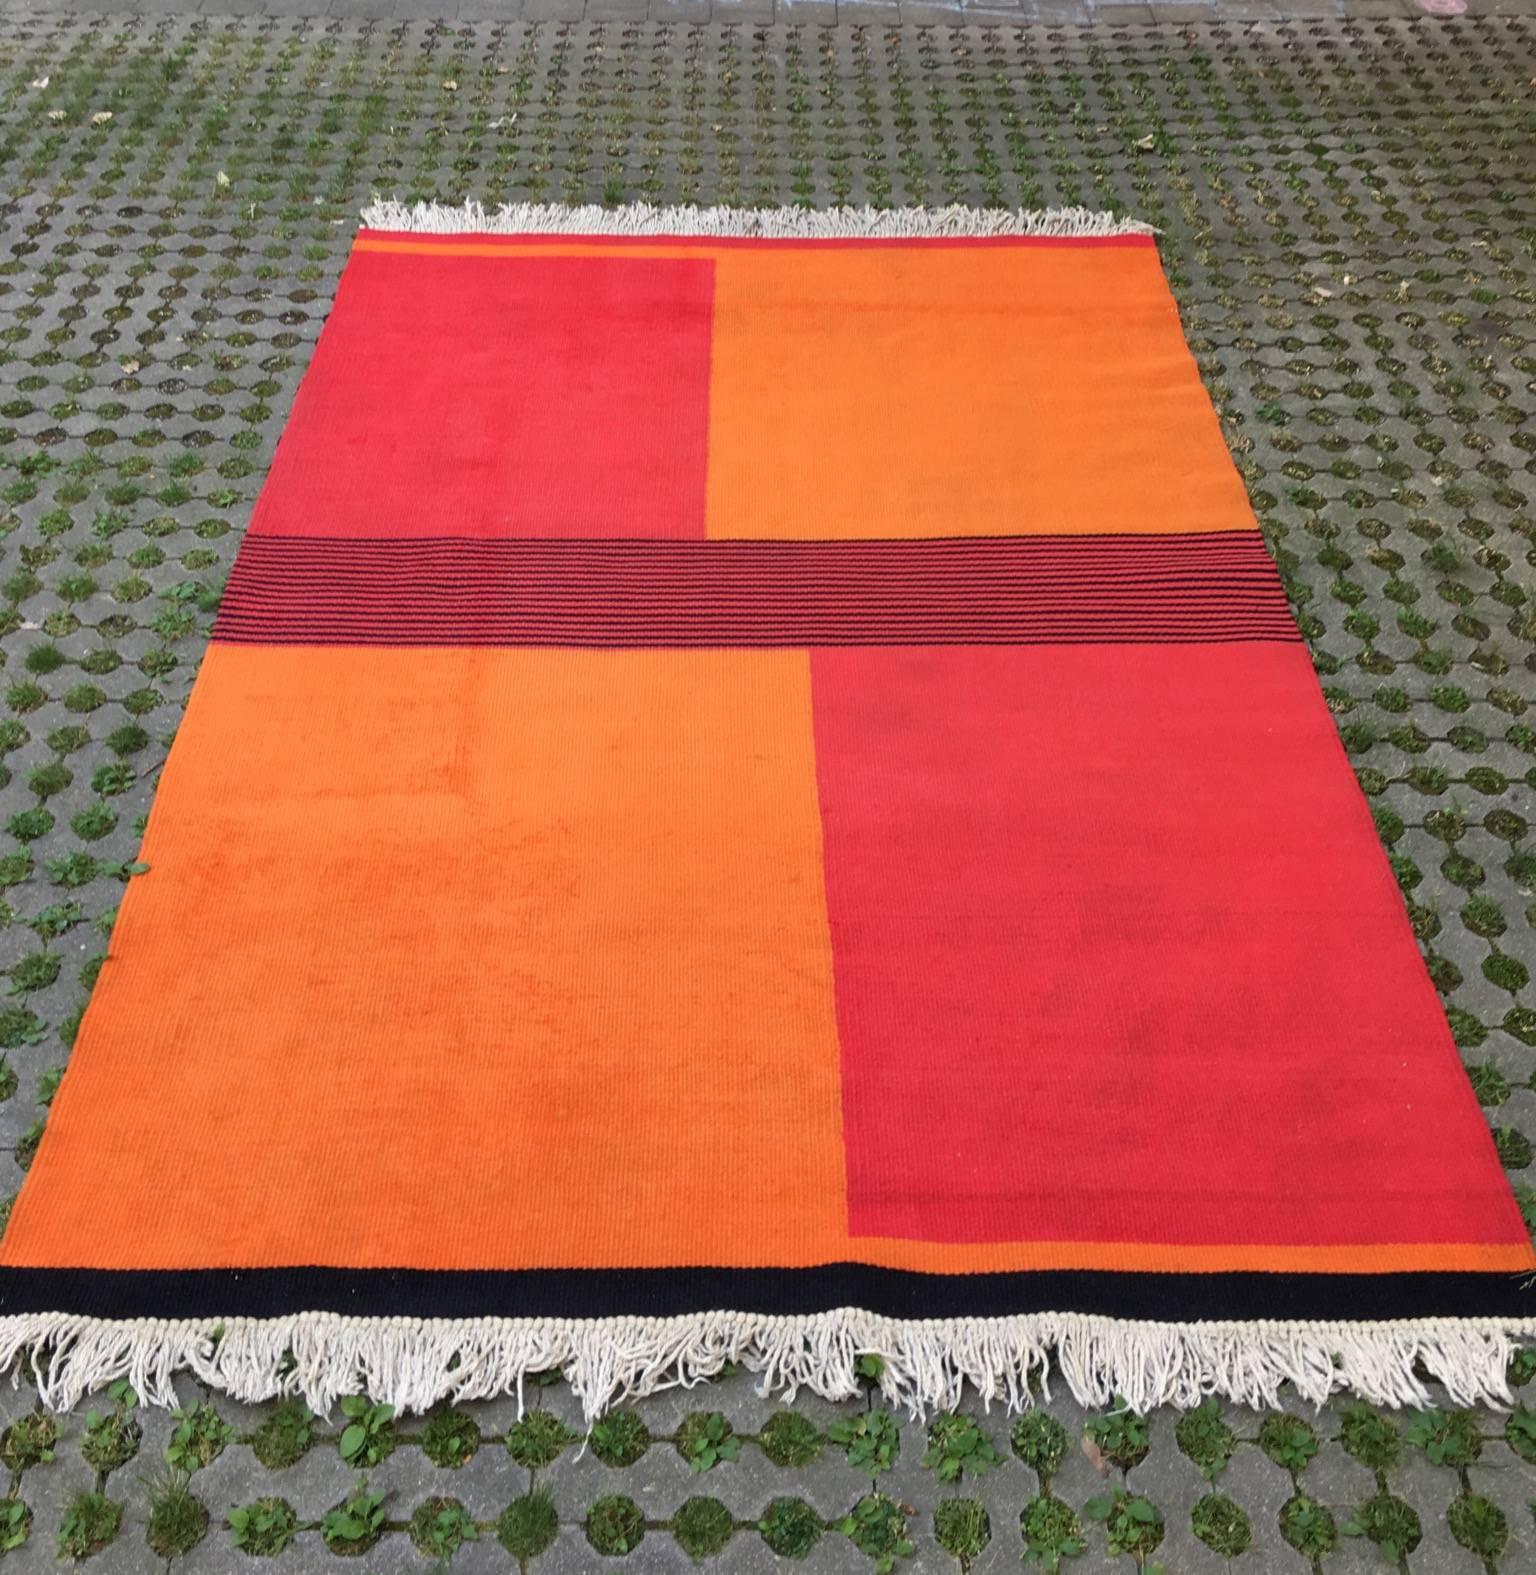 A rug produced in former Czechoslovakia. Designed by Antonin Kybal in the early 1930s. Made of hand-knotted sheep wool. The carpet was cleaned. Very nice vintage condition.